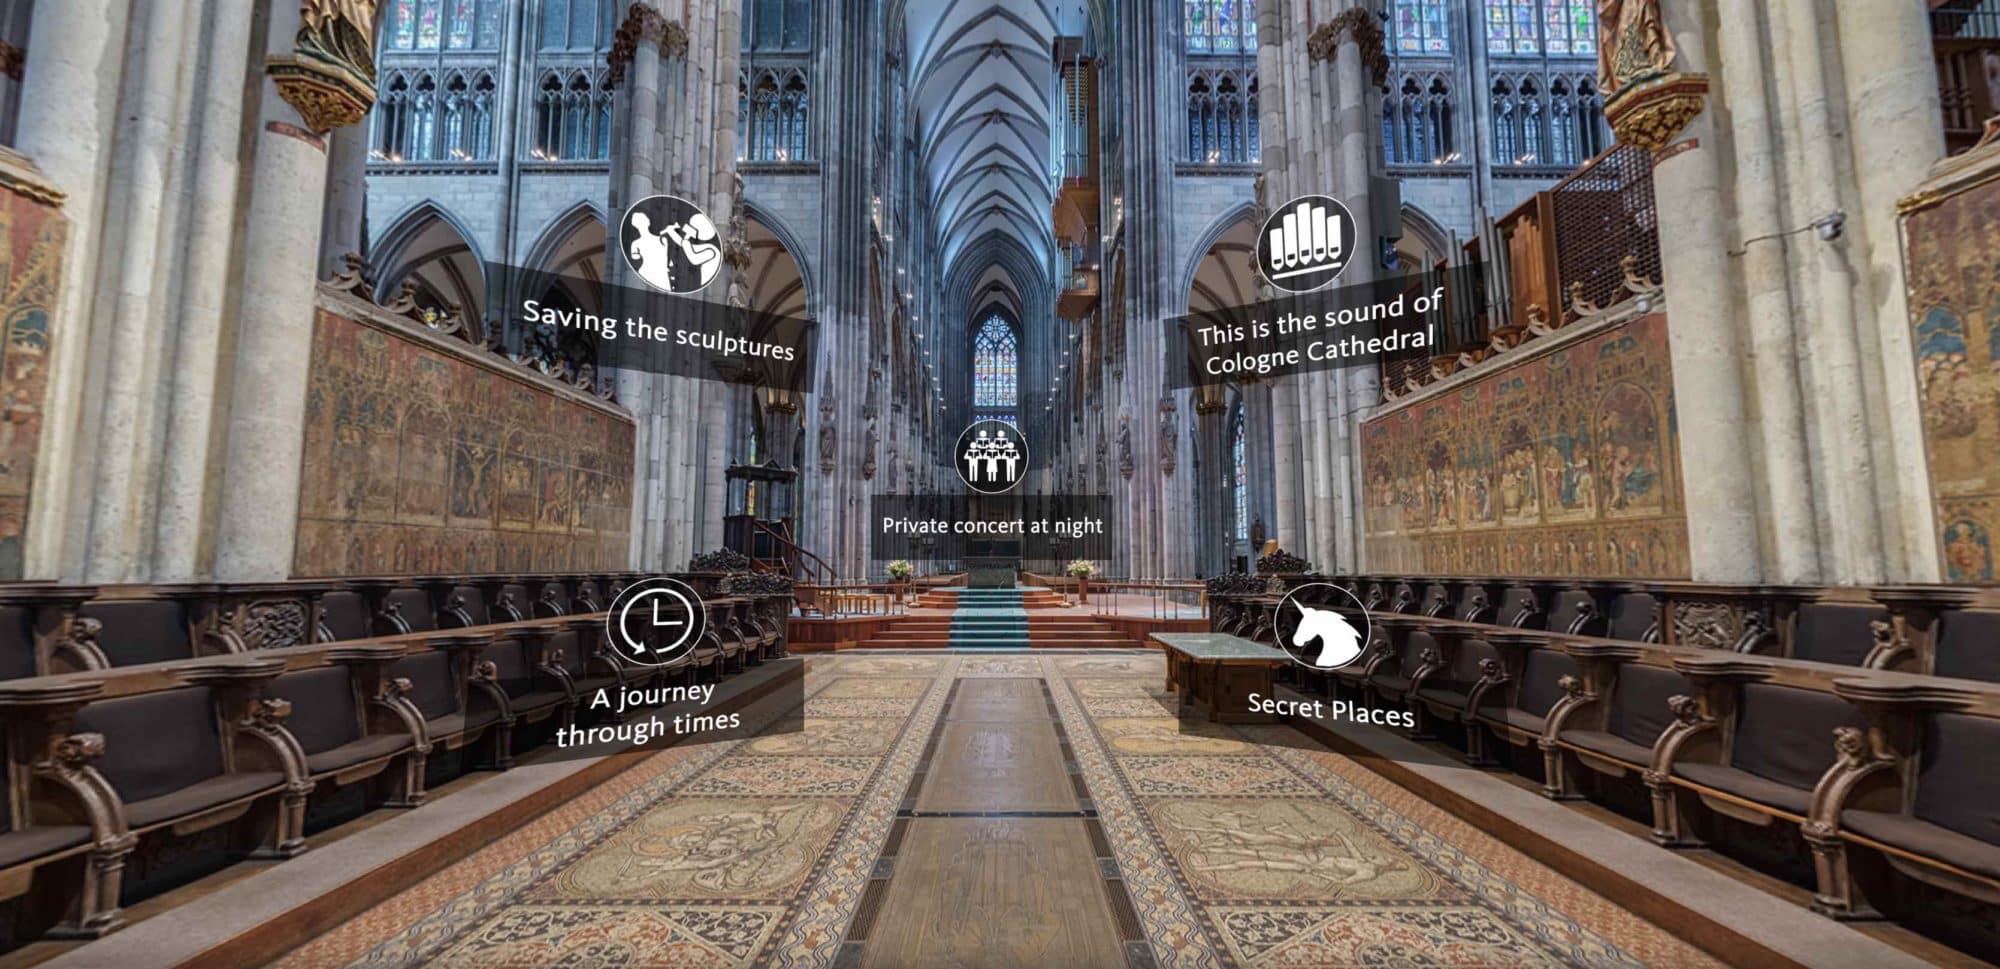 WDR Cologne Cathedral In 360 1 1024x496